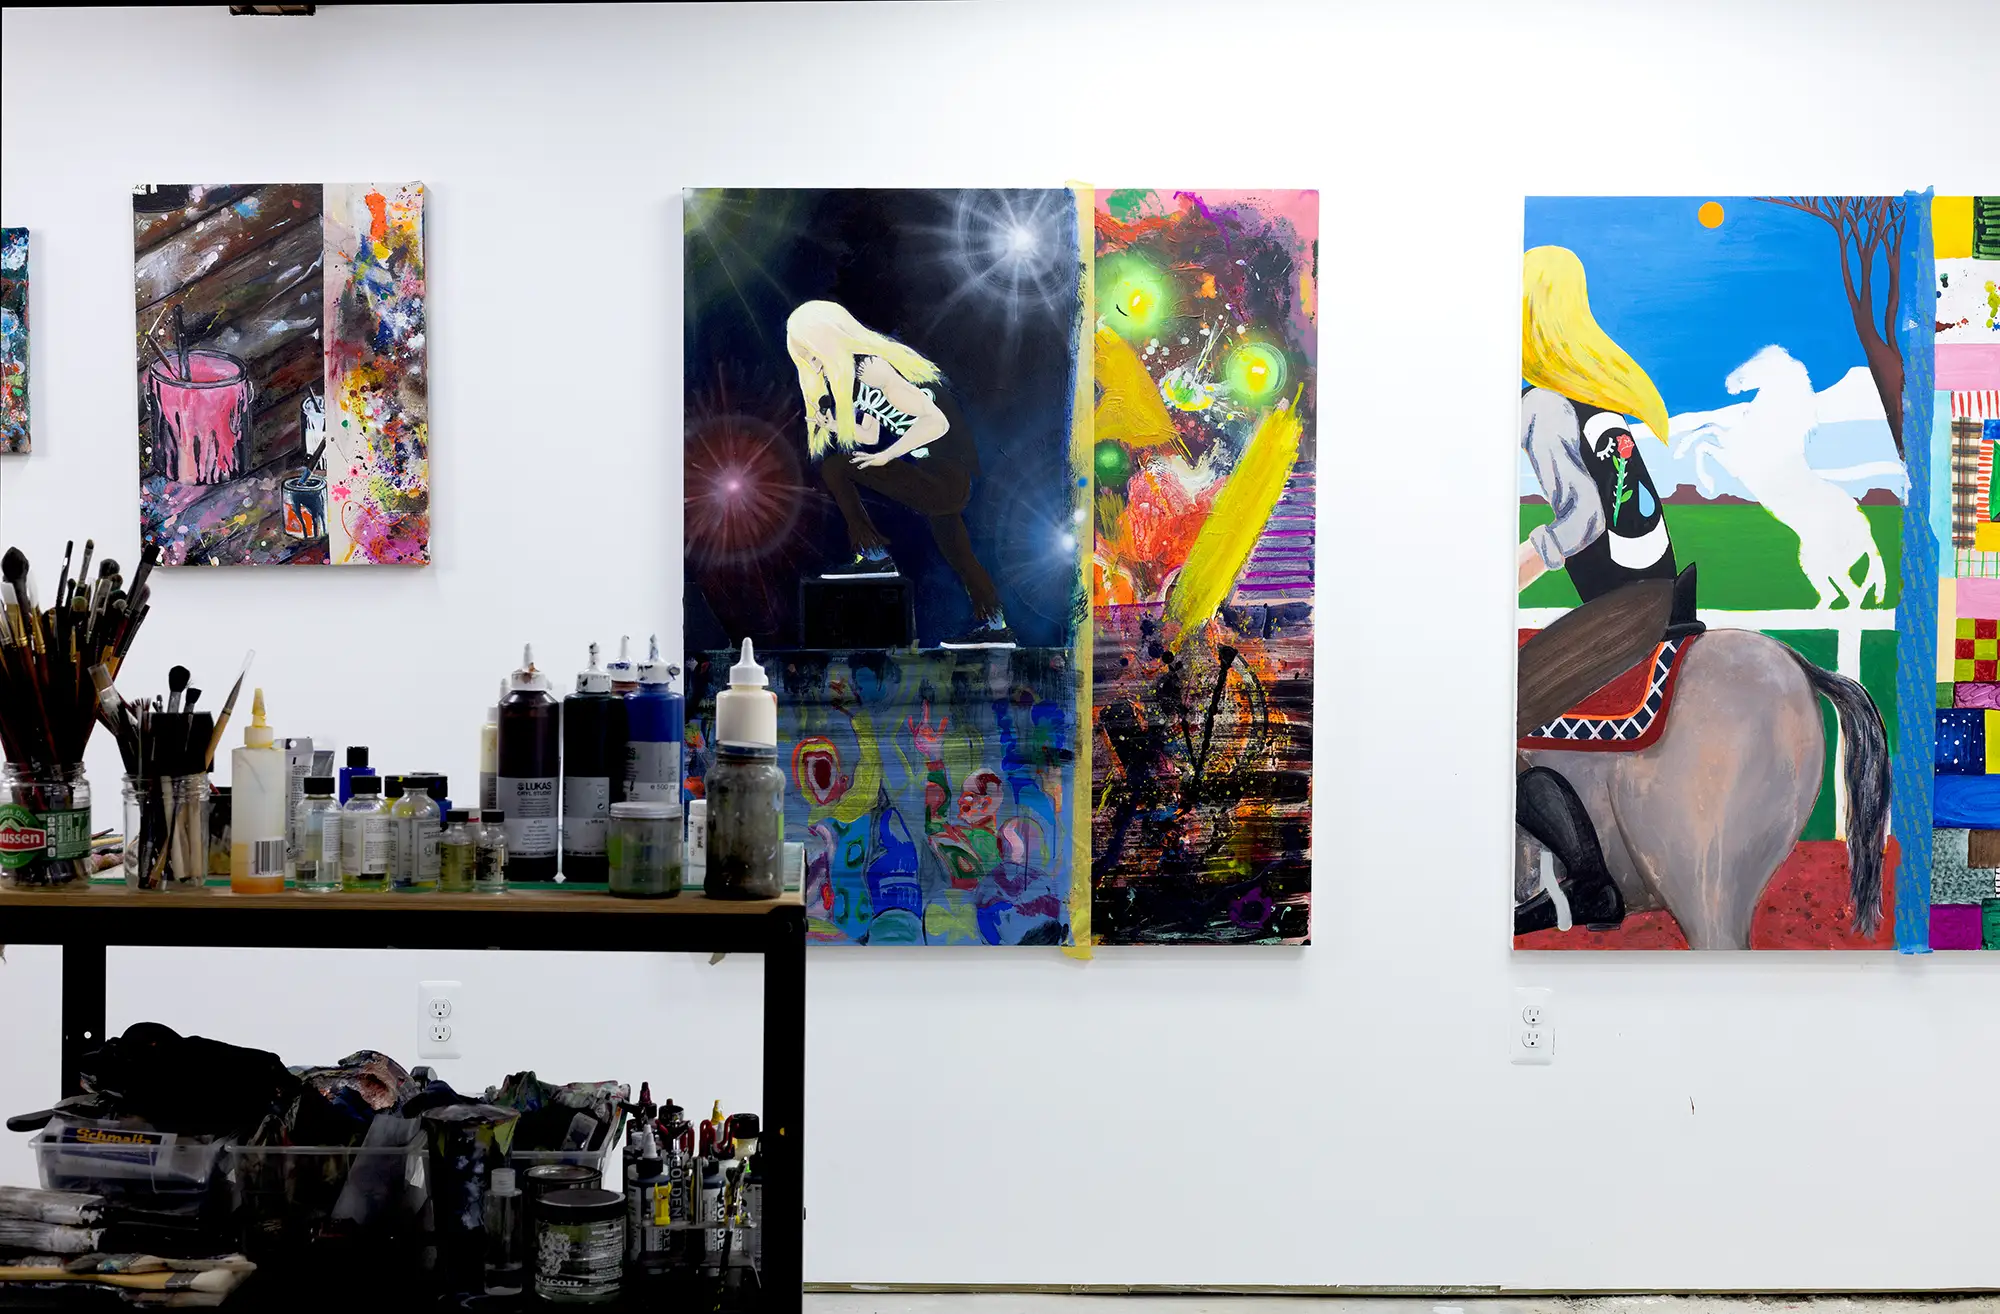 brandon aguiar, guided studio tour, paint, colorful art practice in contemporary painting now